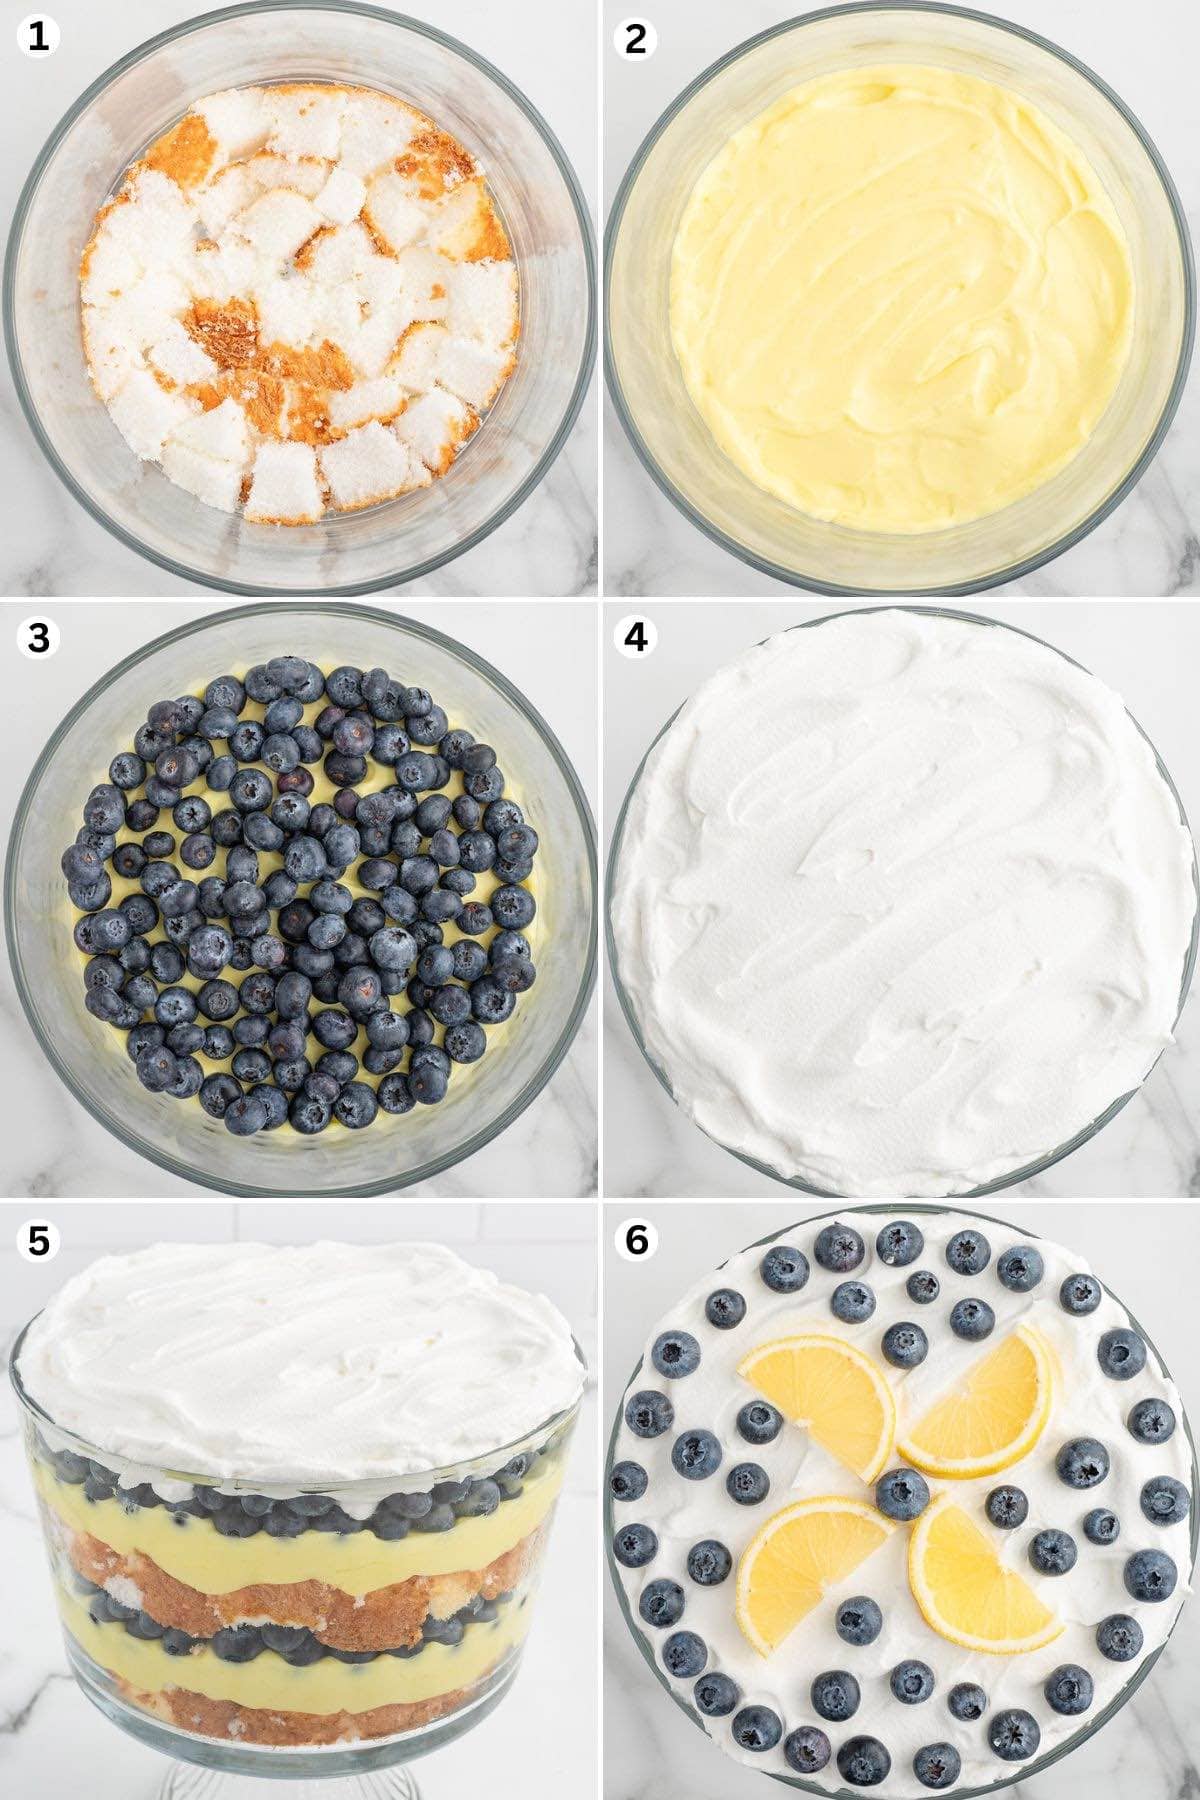 Place cubes of cake into the bottom of the trifle bowl. Add the pudding mixture. Sprinkle the blueberries. Repeat the layers.Spread the whipped topping over the top berry layer and decorate.